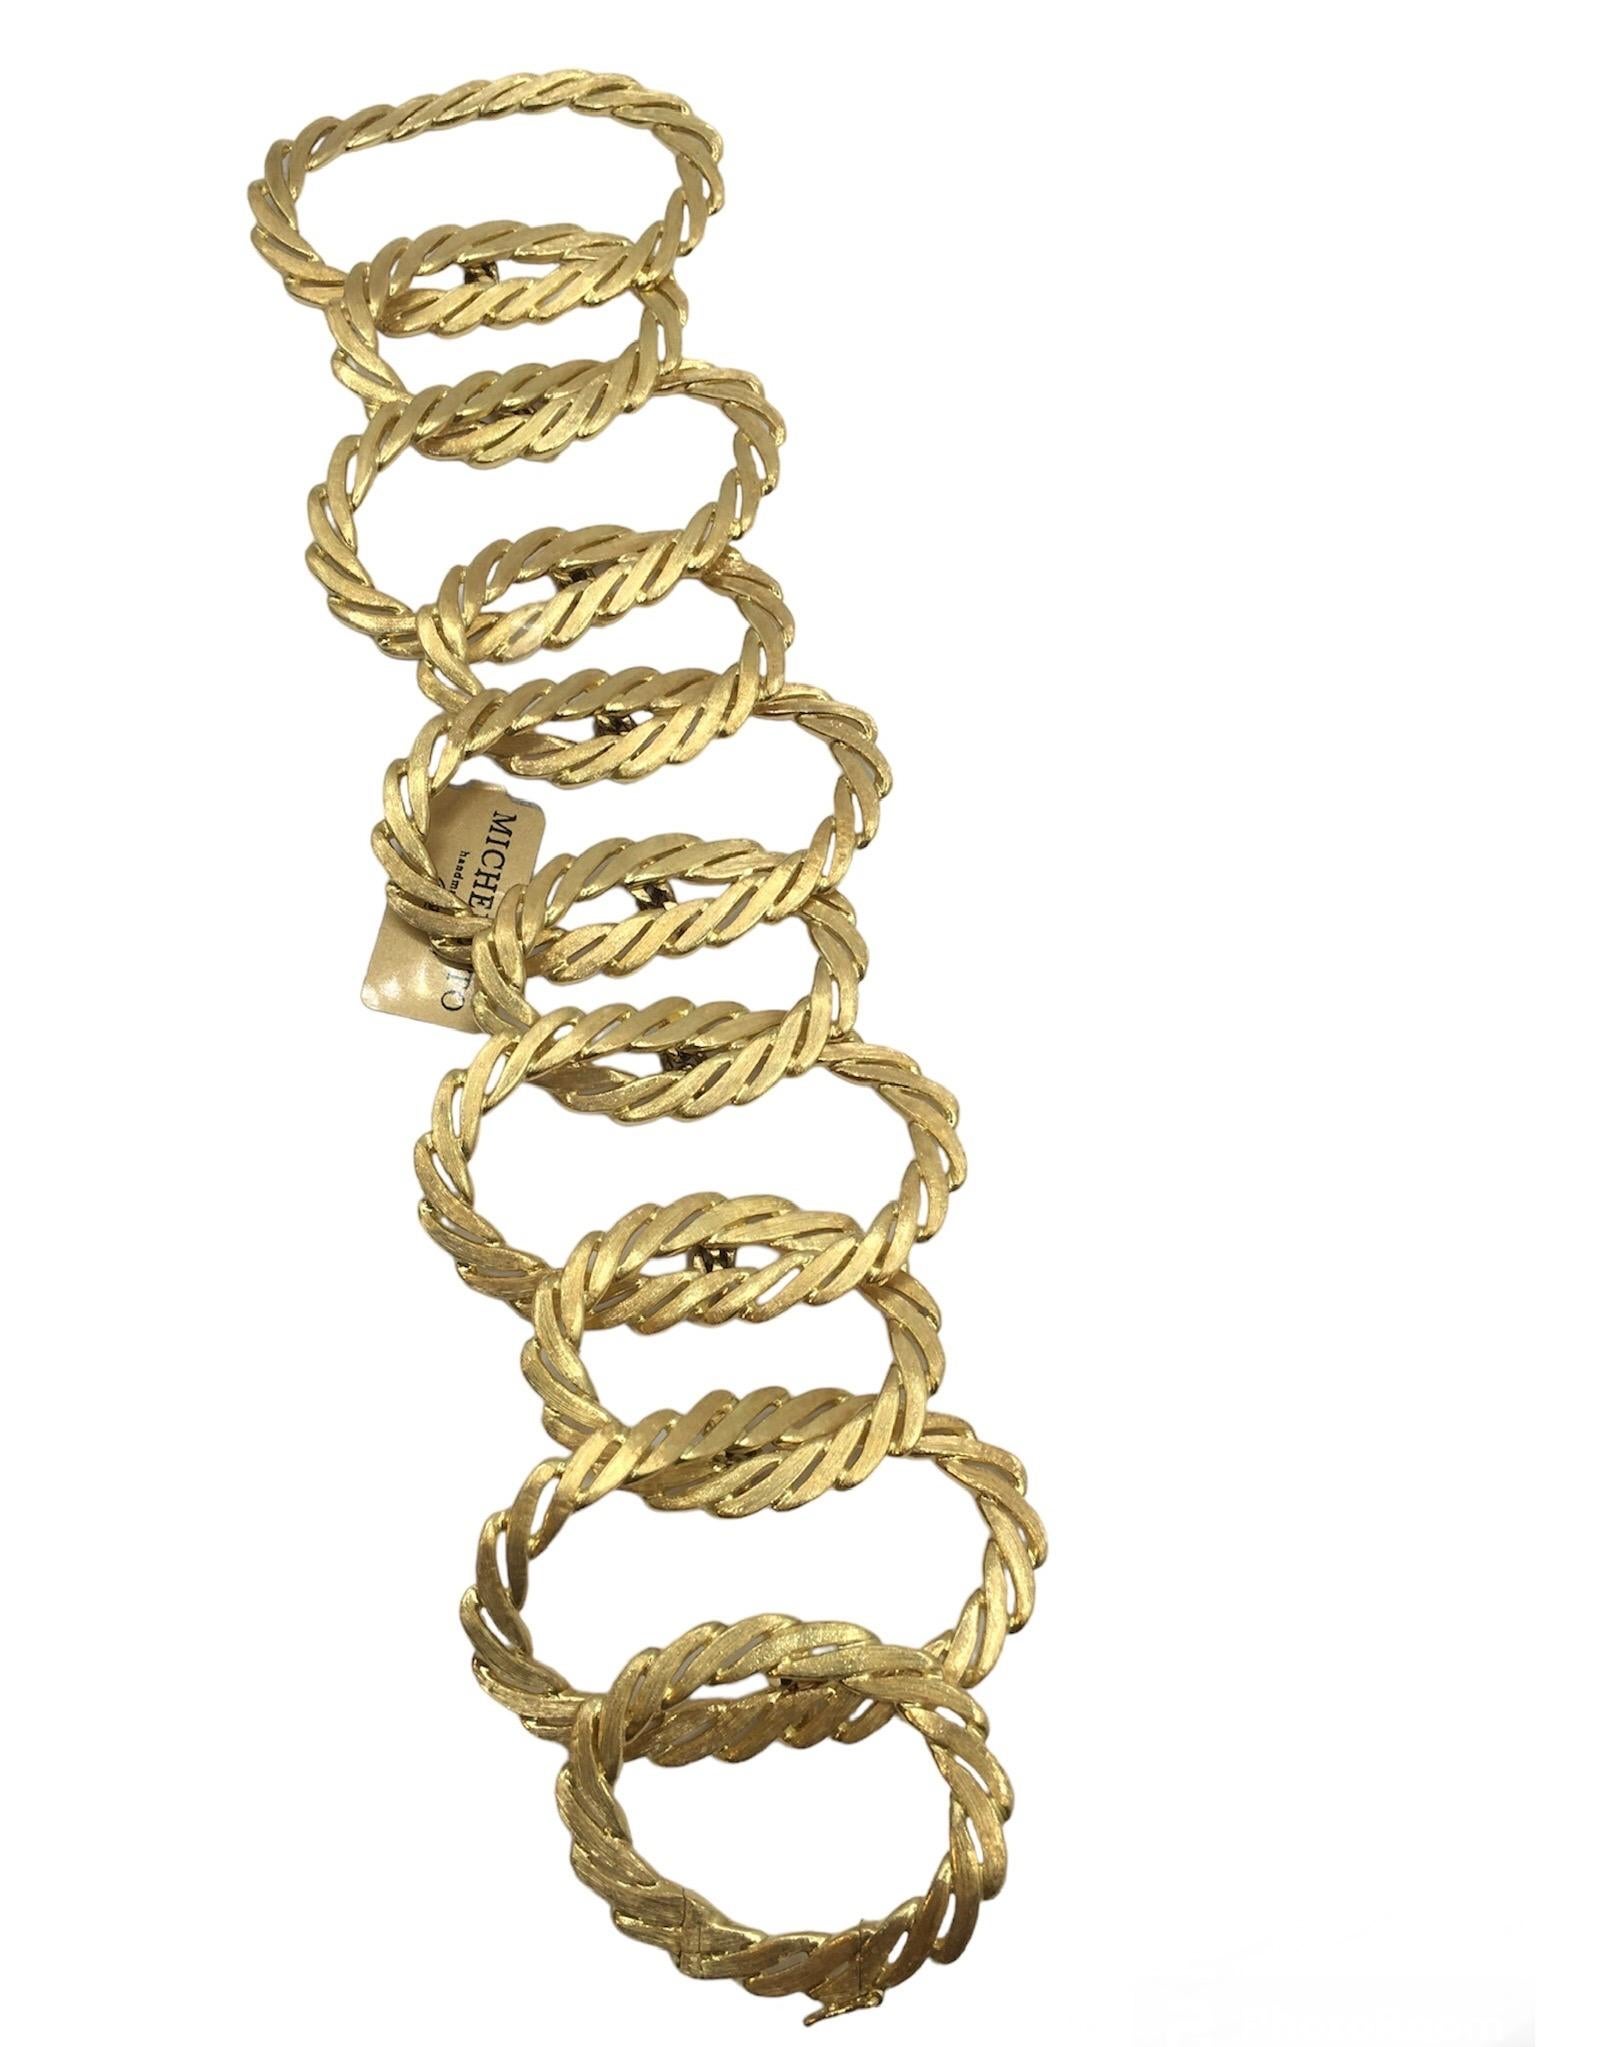 The two size twisted ovals create a very nice design for the bracelet of the Optical collection 
the brushed finishing makes it very refined
Total weight of yellow gold 18 kt gr 78.70
Stamp 750

